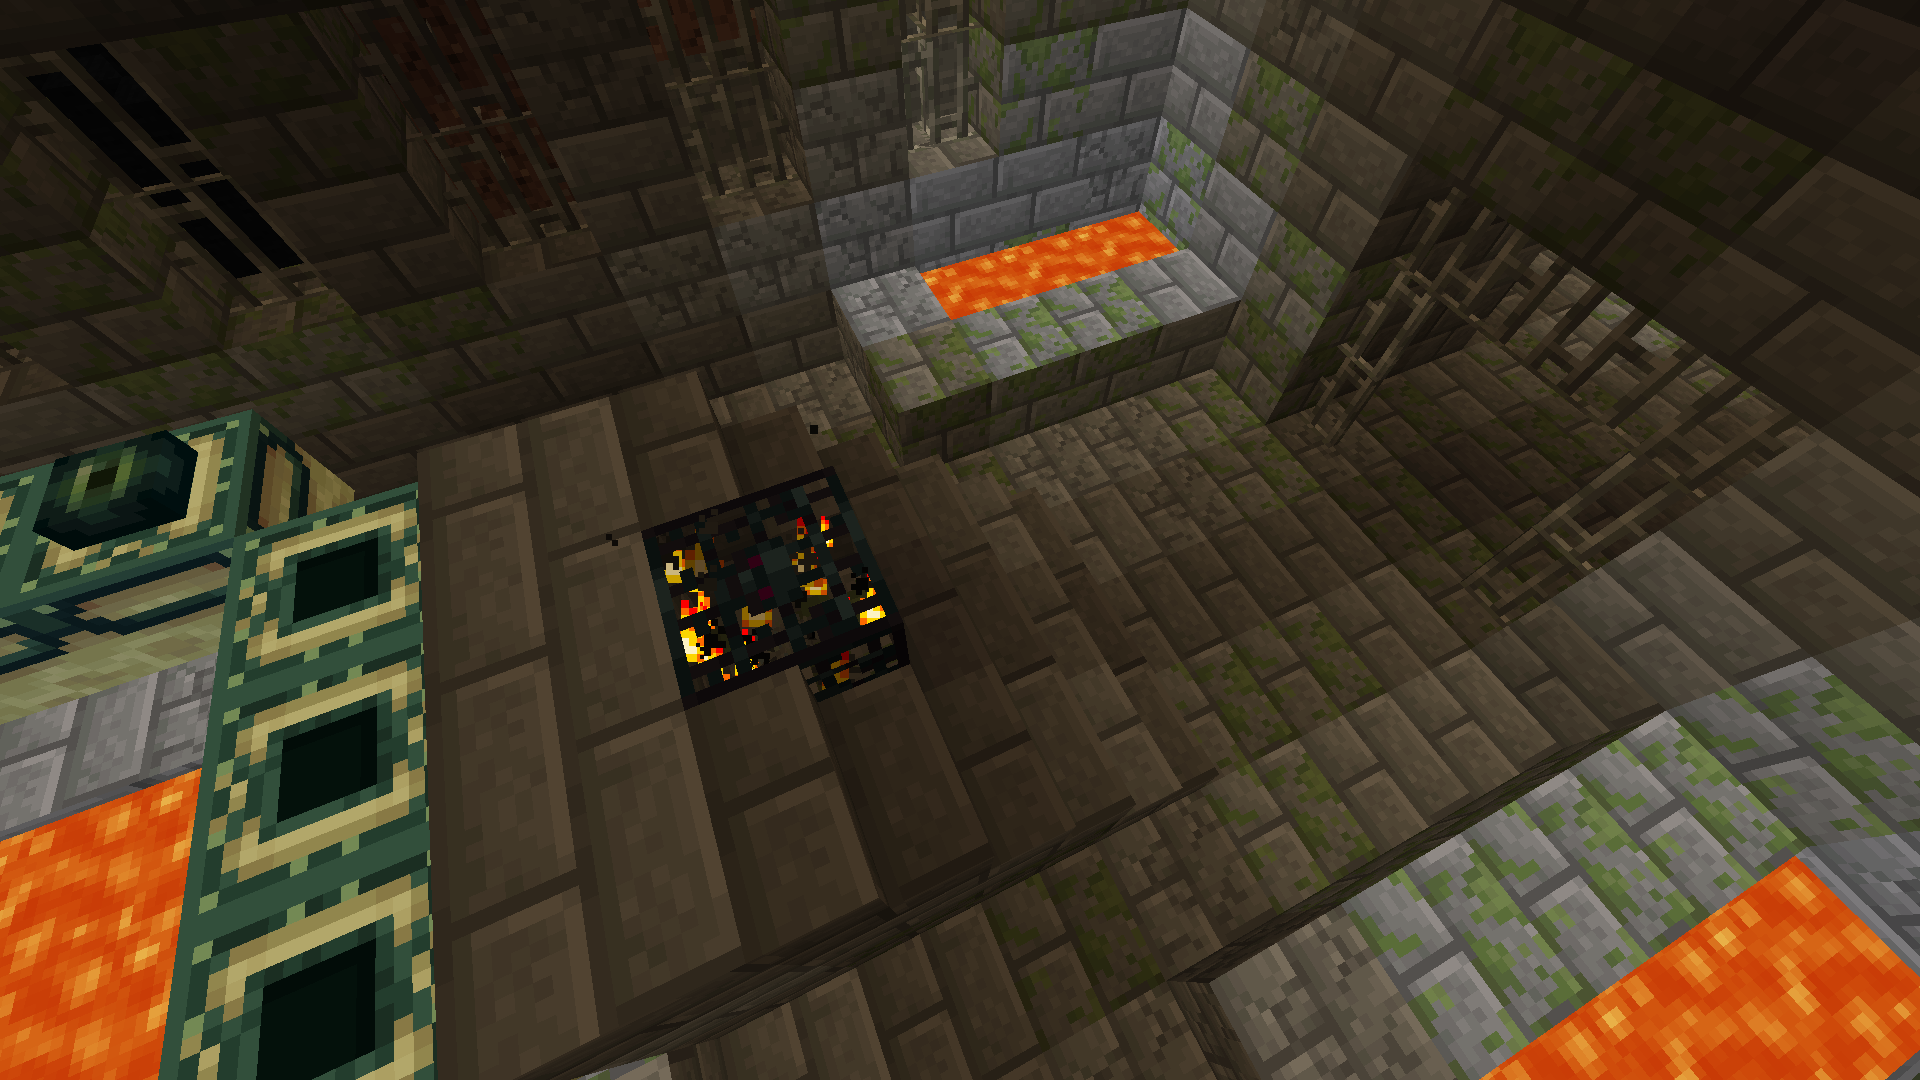 End Portal without Silverfish Spawner